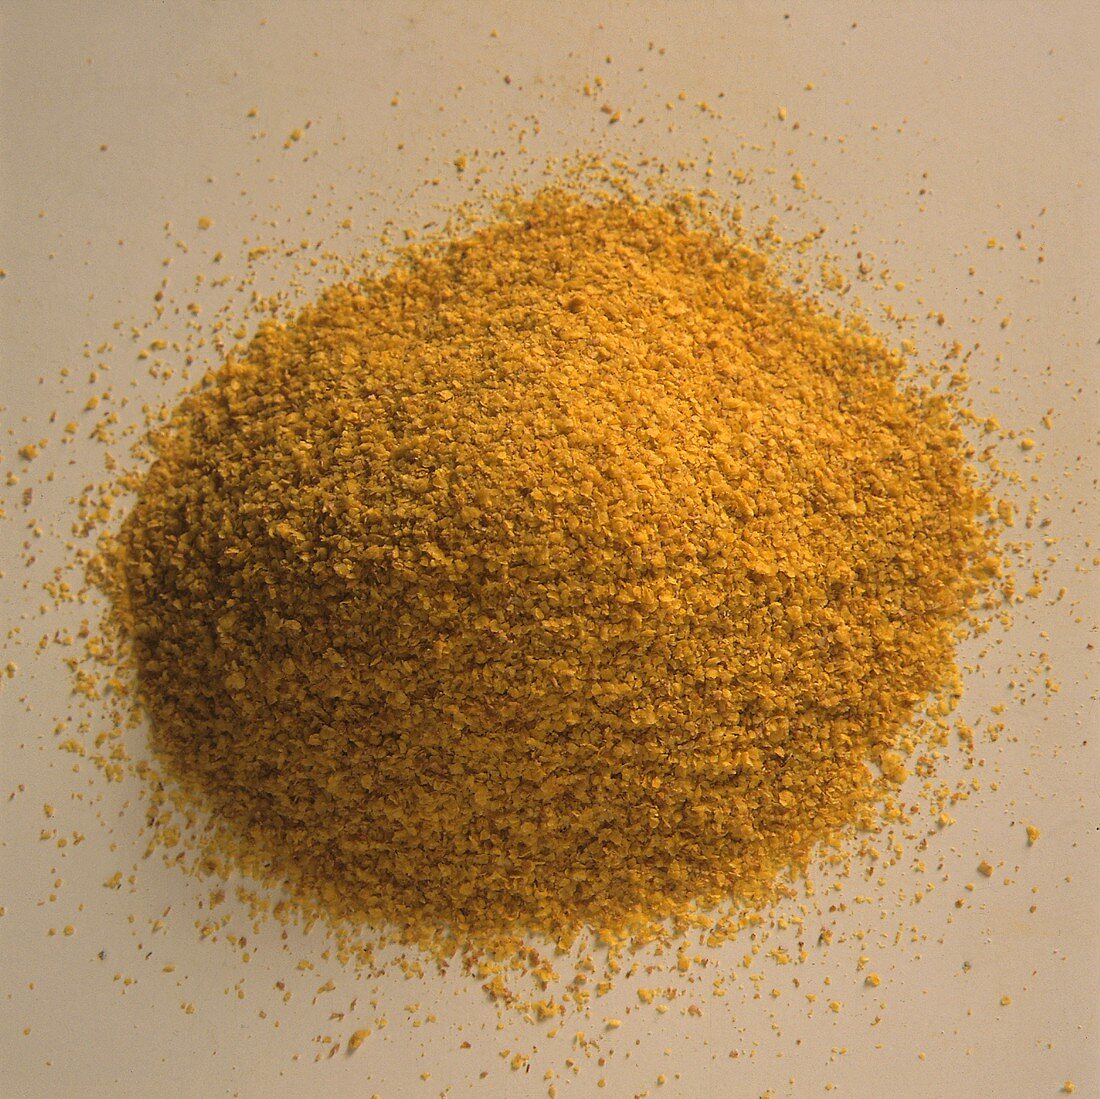 A pile of loose Wheat Germ